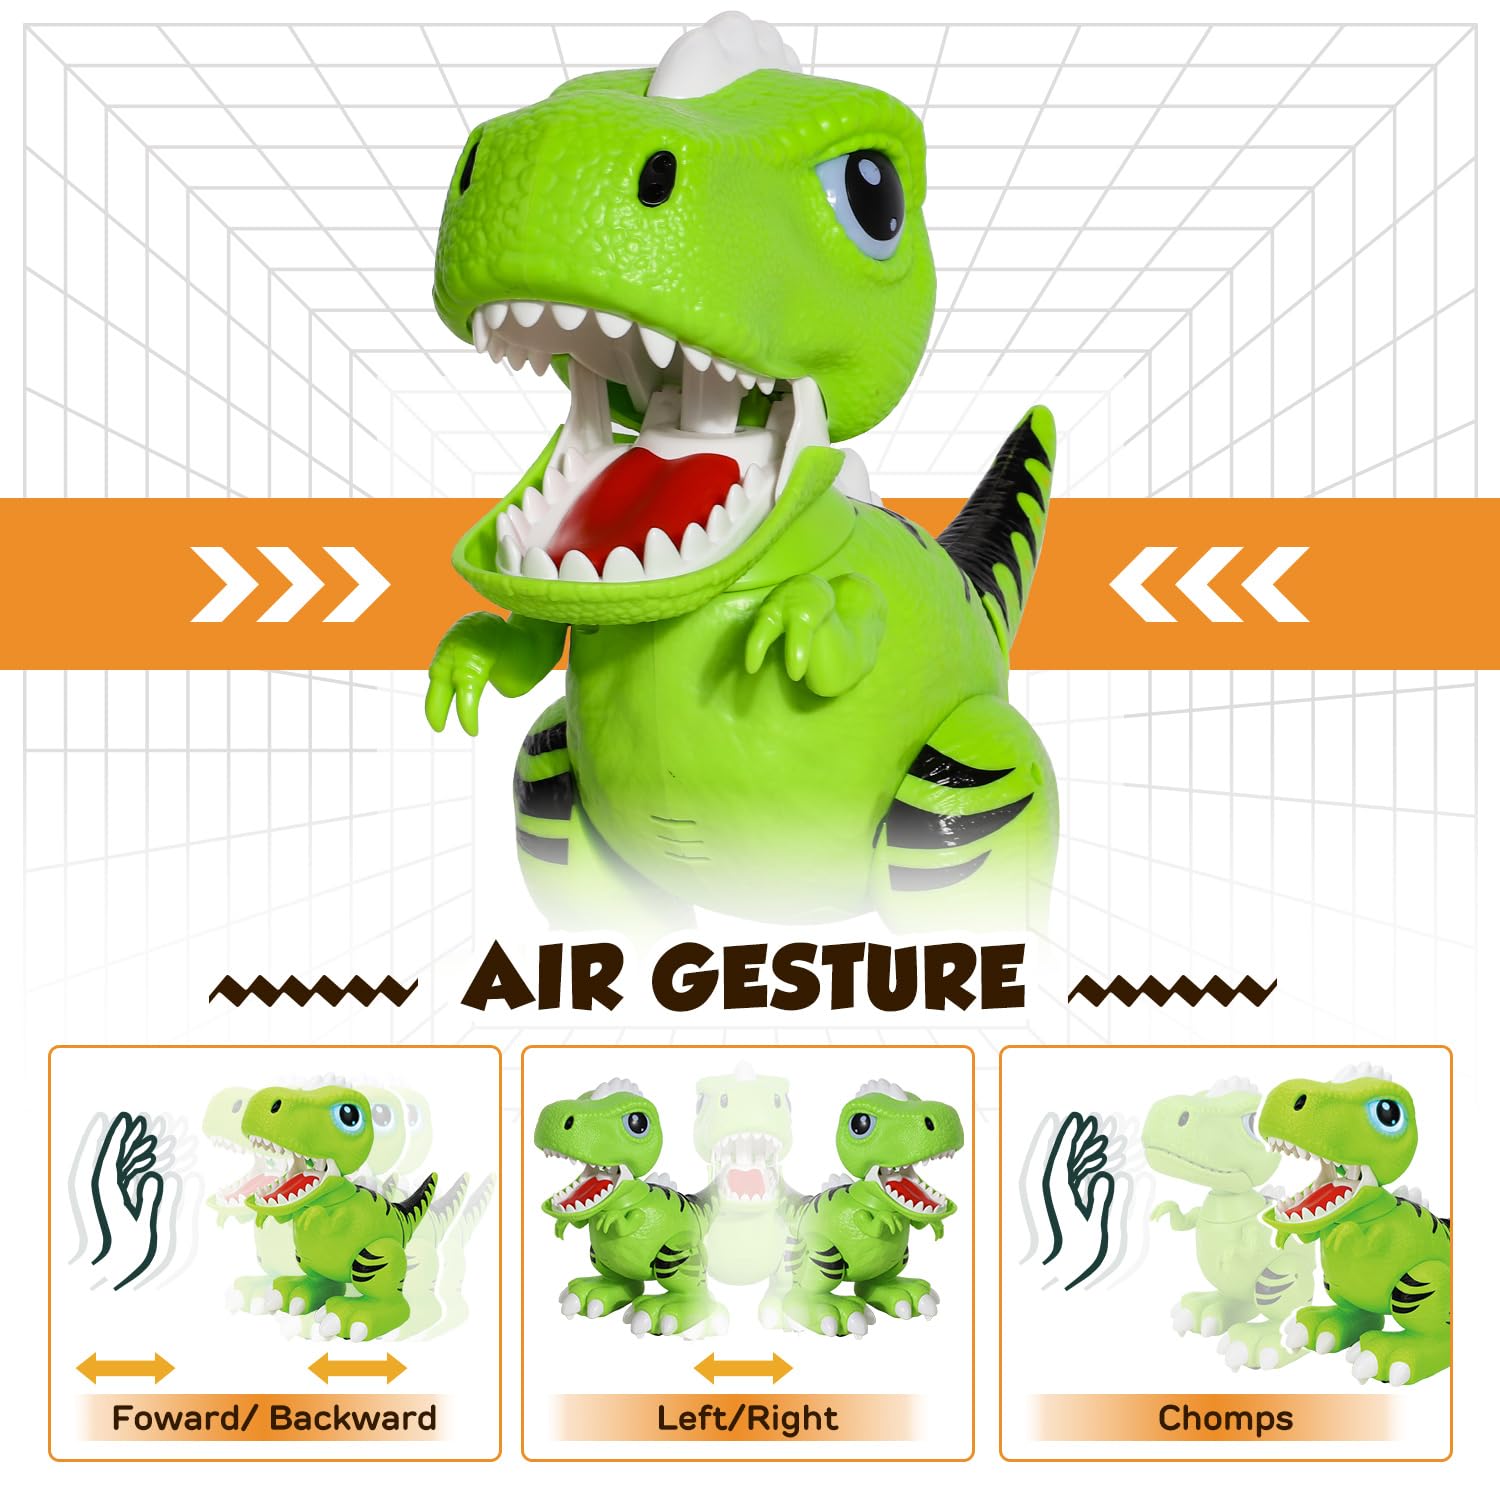 STEAM Life RC Robot Dinosaur Toys for Kids, Remote Control Smart Robot Pet Dinosaur for Age 3 4 5 6 7 8 Boys Girls, Interactive Hand Motion Gesture Walking Dancing Robot, STEM Kids Gifts Toys for Boy